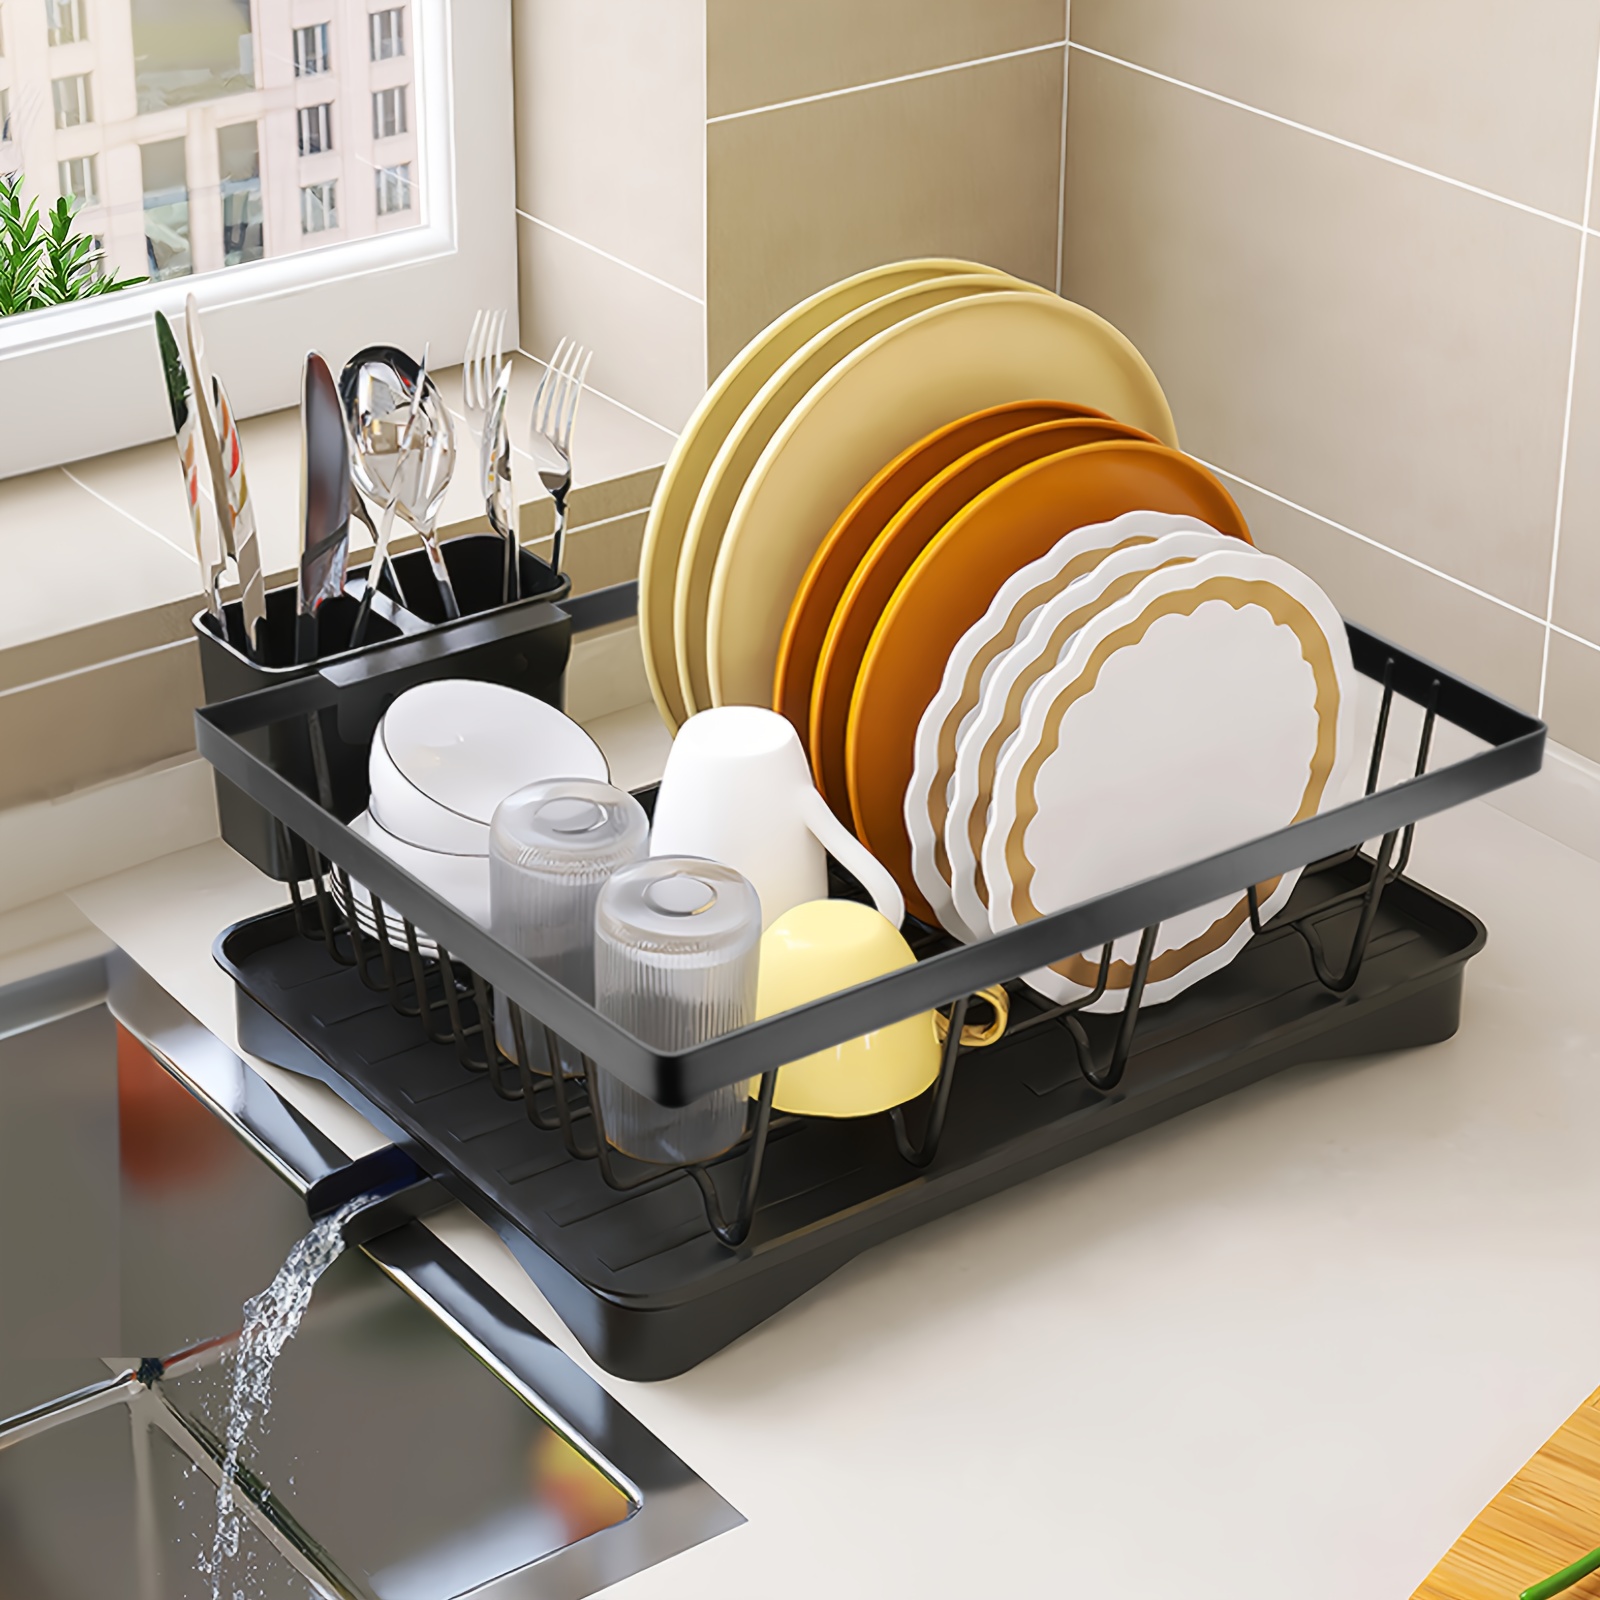 

Large-capacity Dish Rack With Automatic Drainboard, Dish Drying Rack For Kitchen Counter, Durable Drying Rack For Countertop, Dish Drainer With Utensil Holder For Dishes